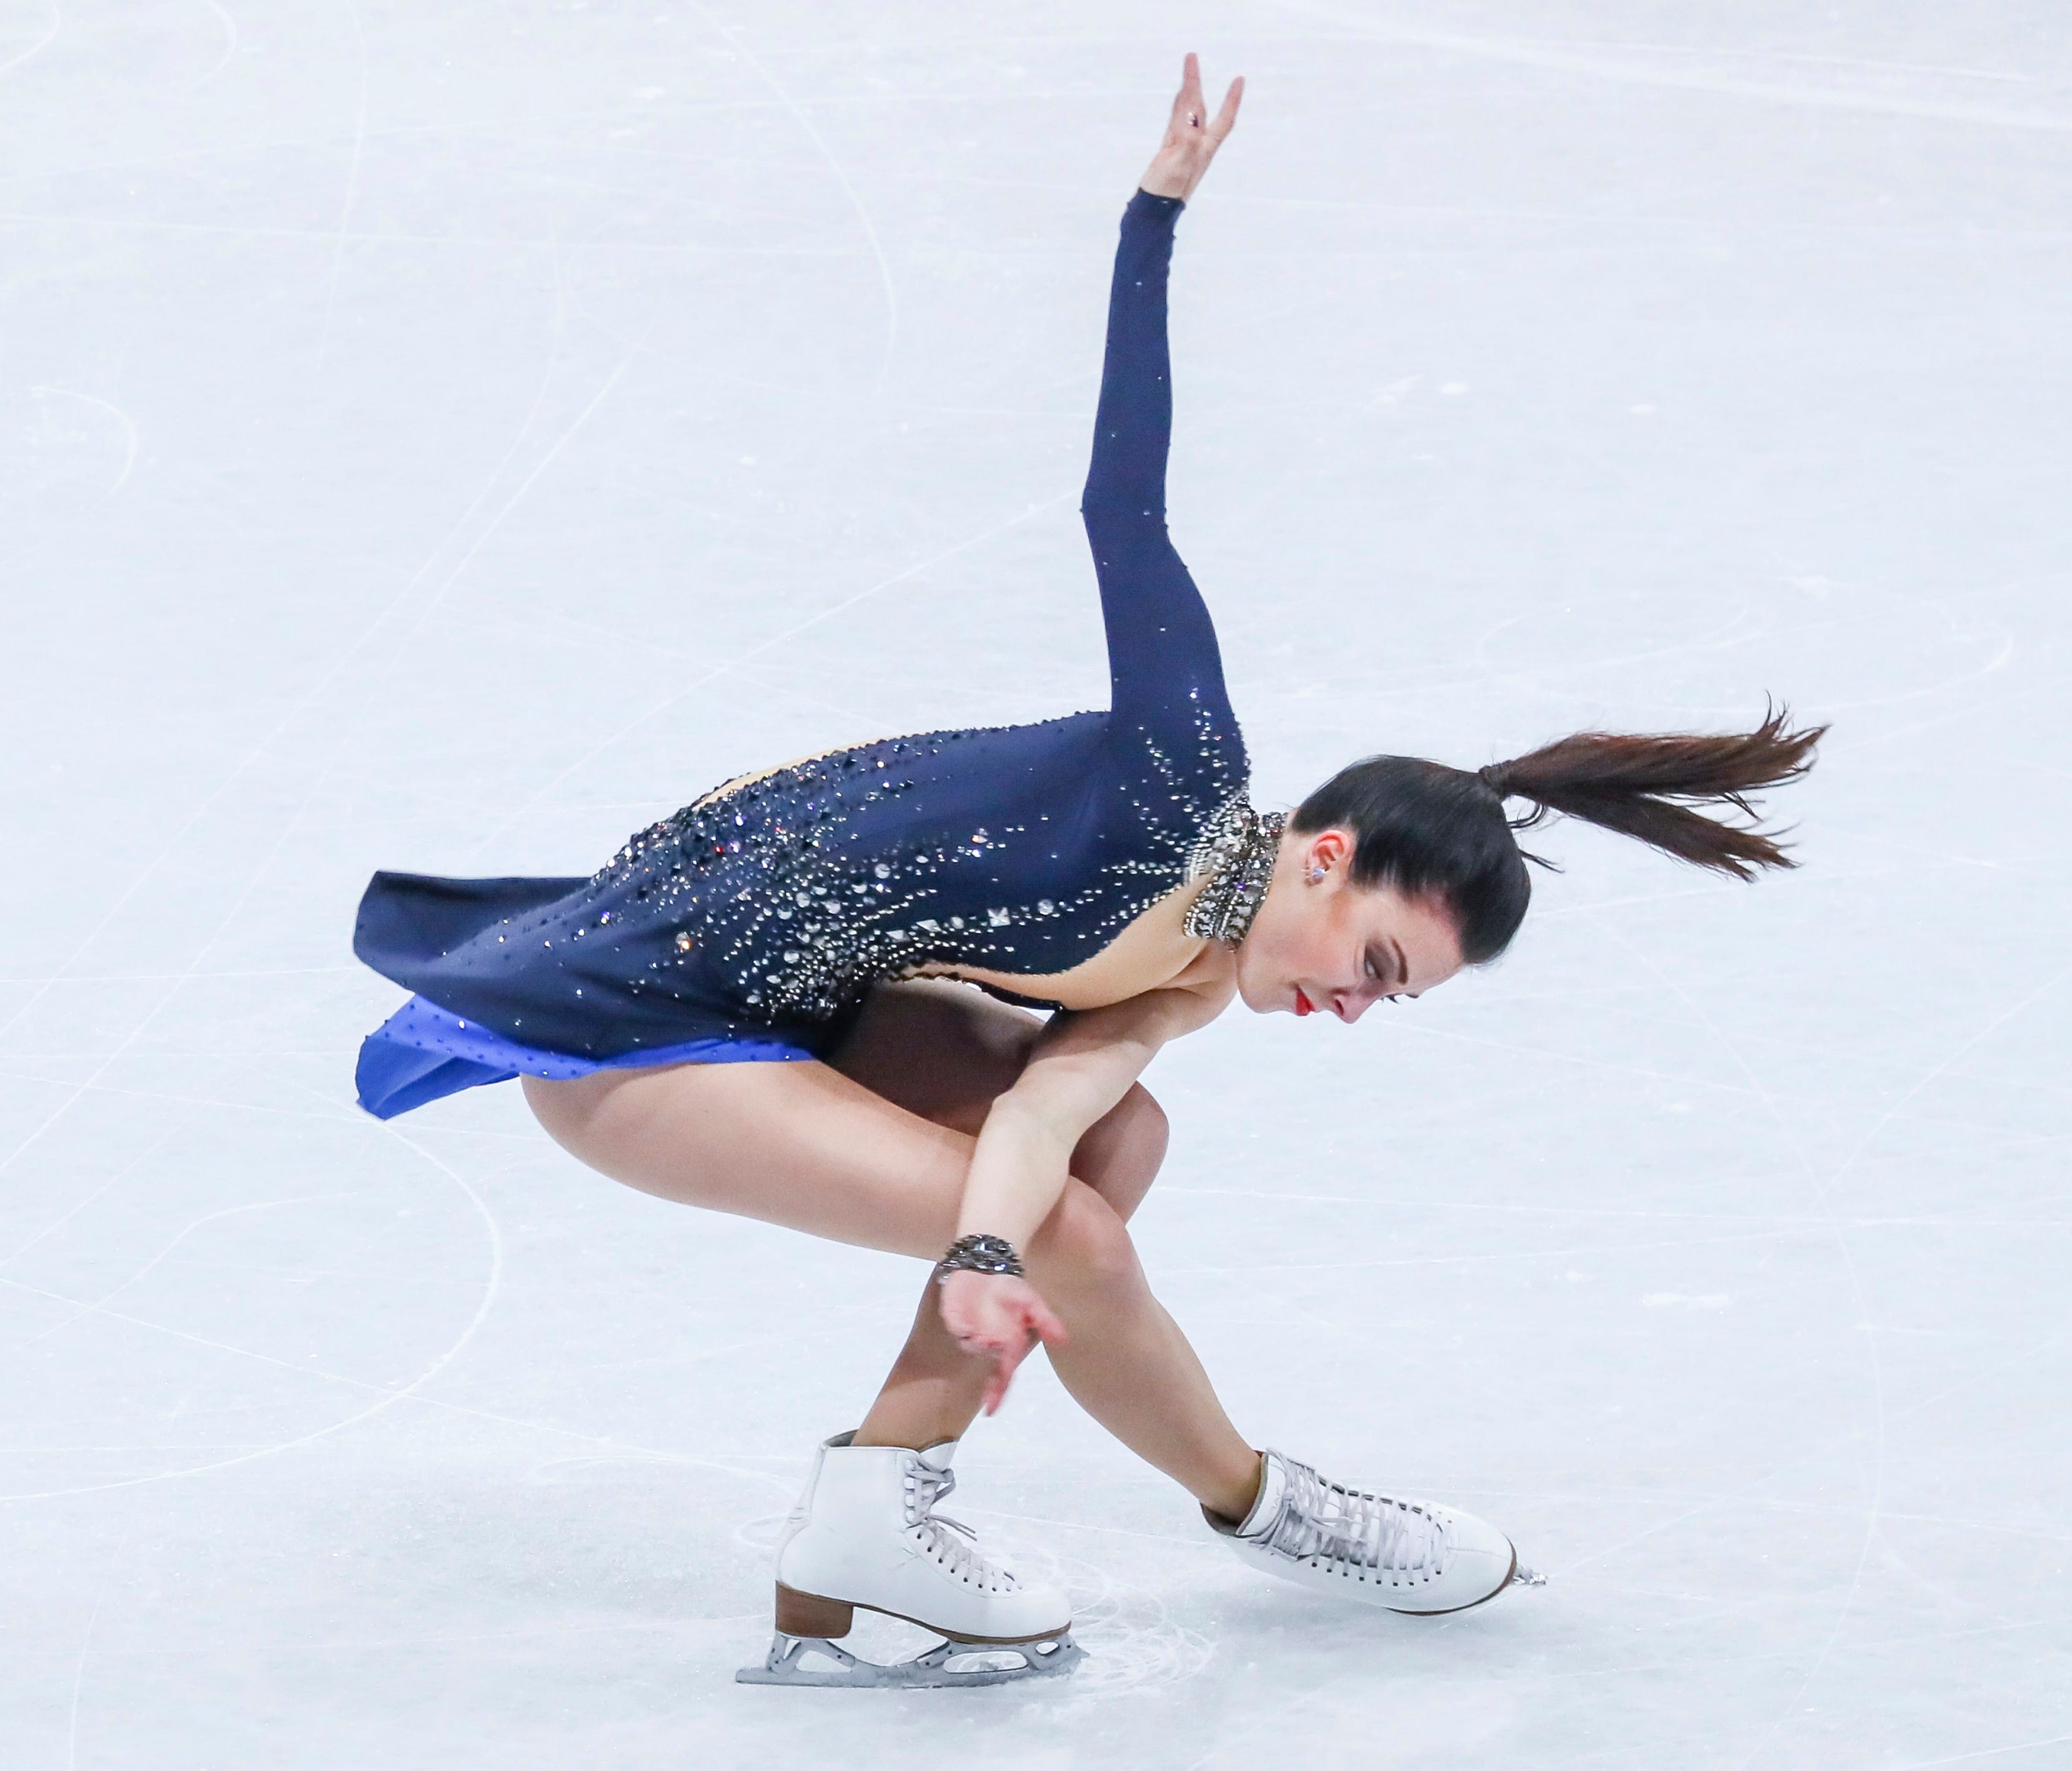 Ashley Wagner in action during the short program of the ISU World Figure Skating Championships in Helsinki, Finland, on March 29.